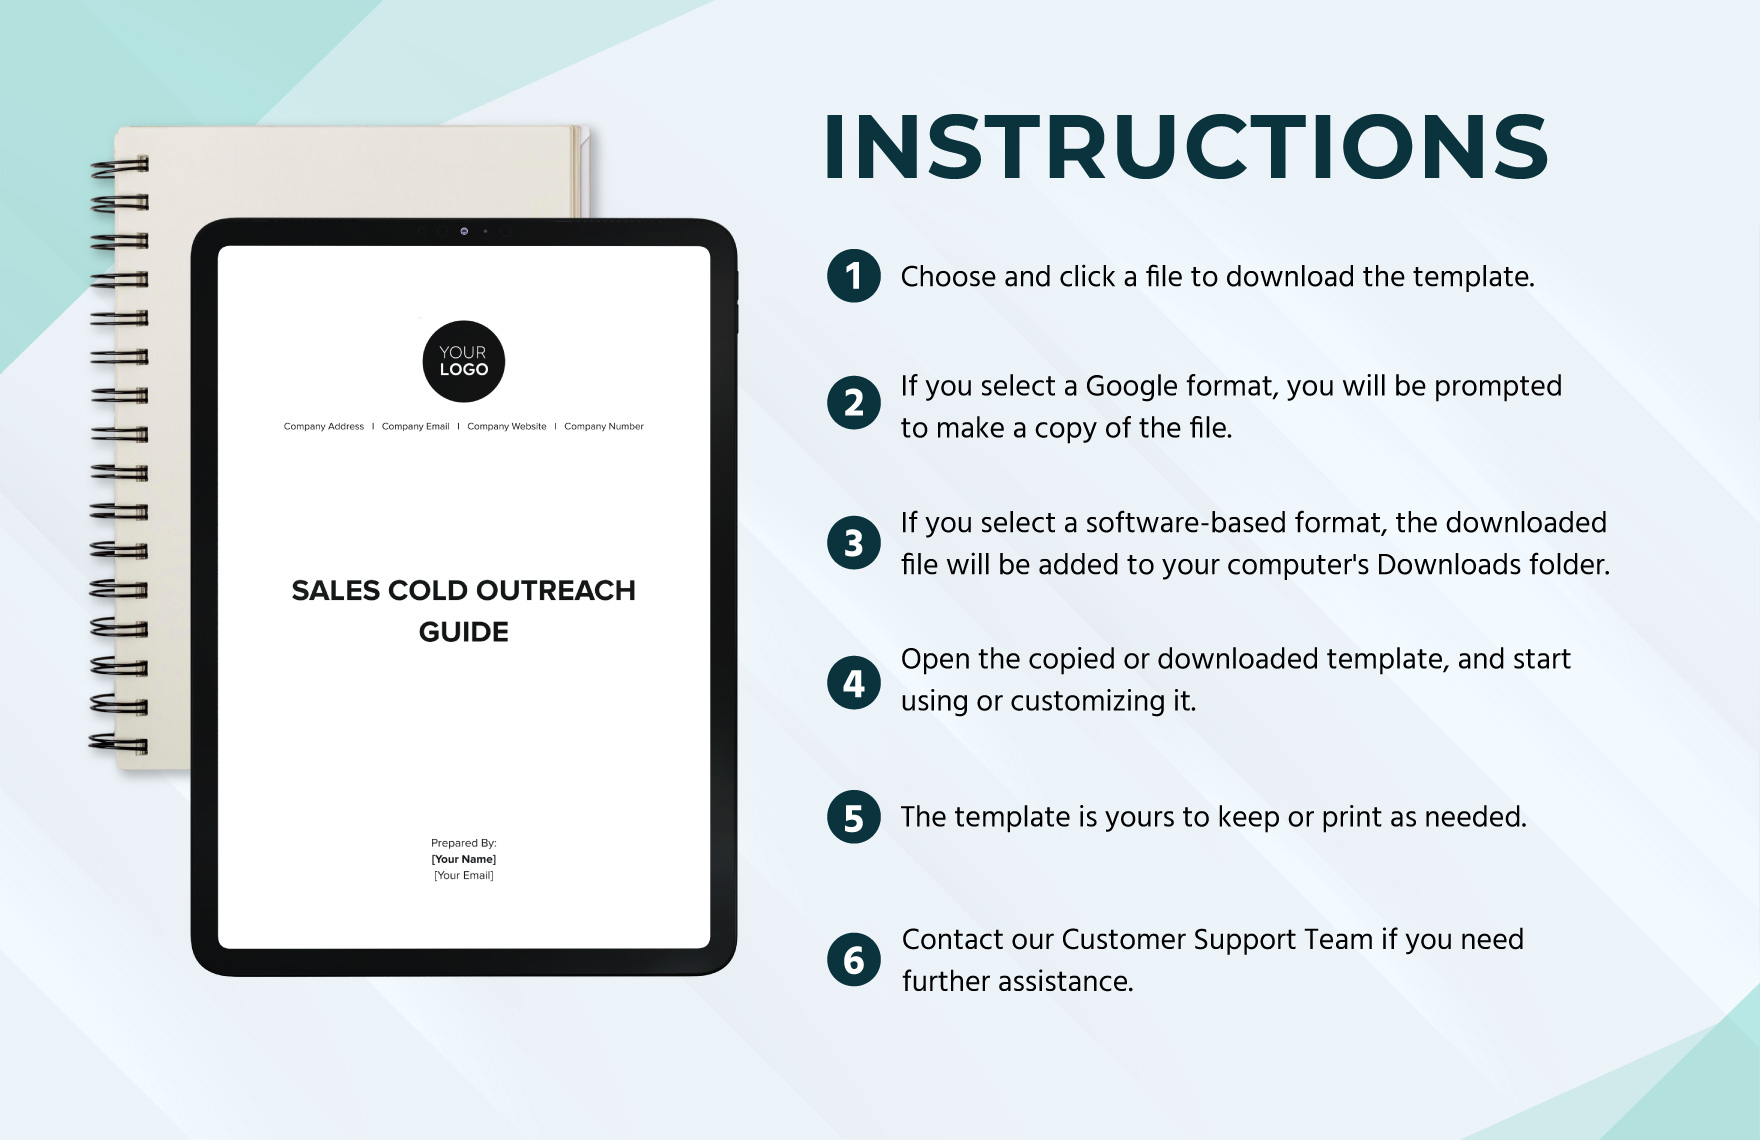 Sales Cold Outreach Guide Template